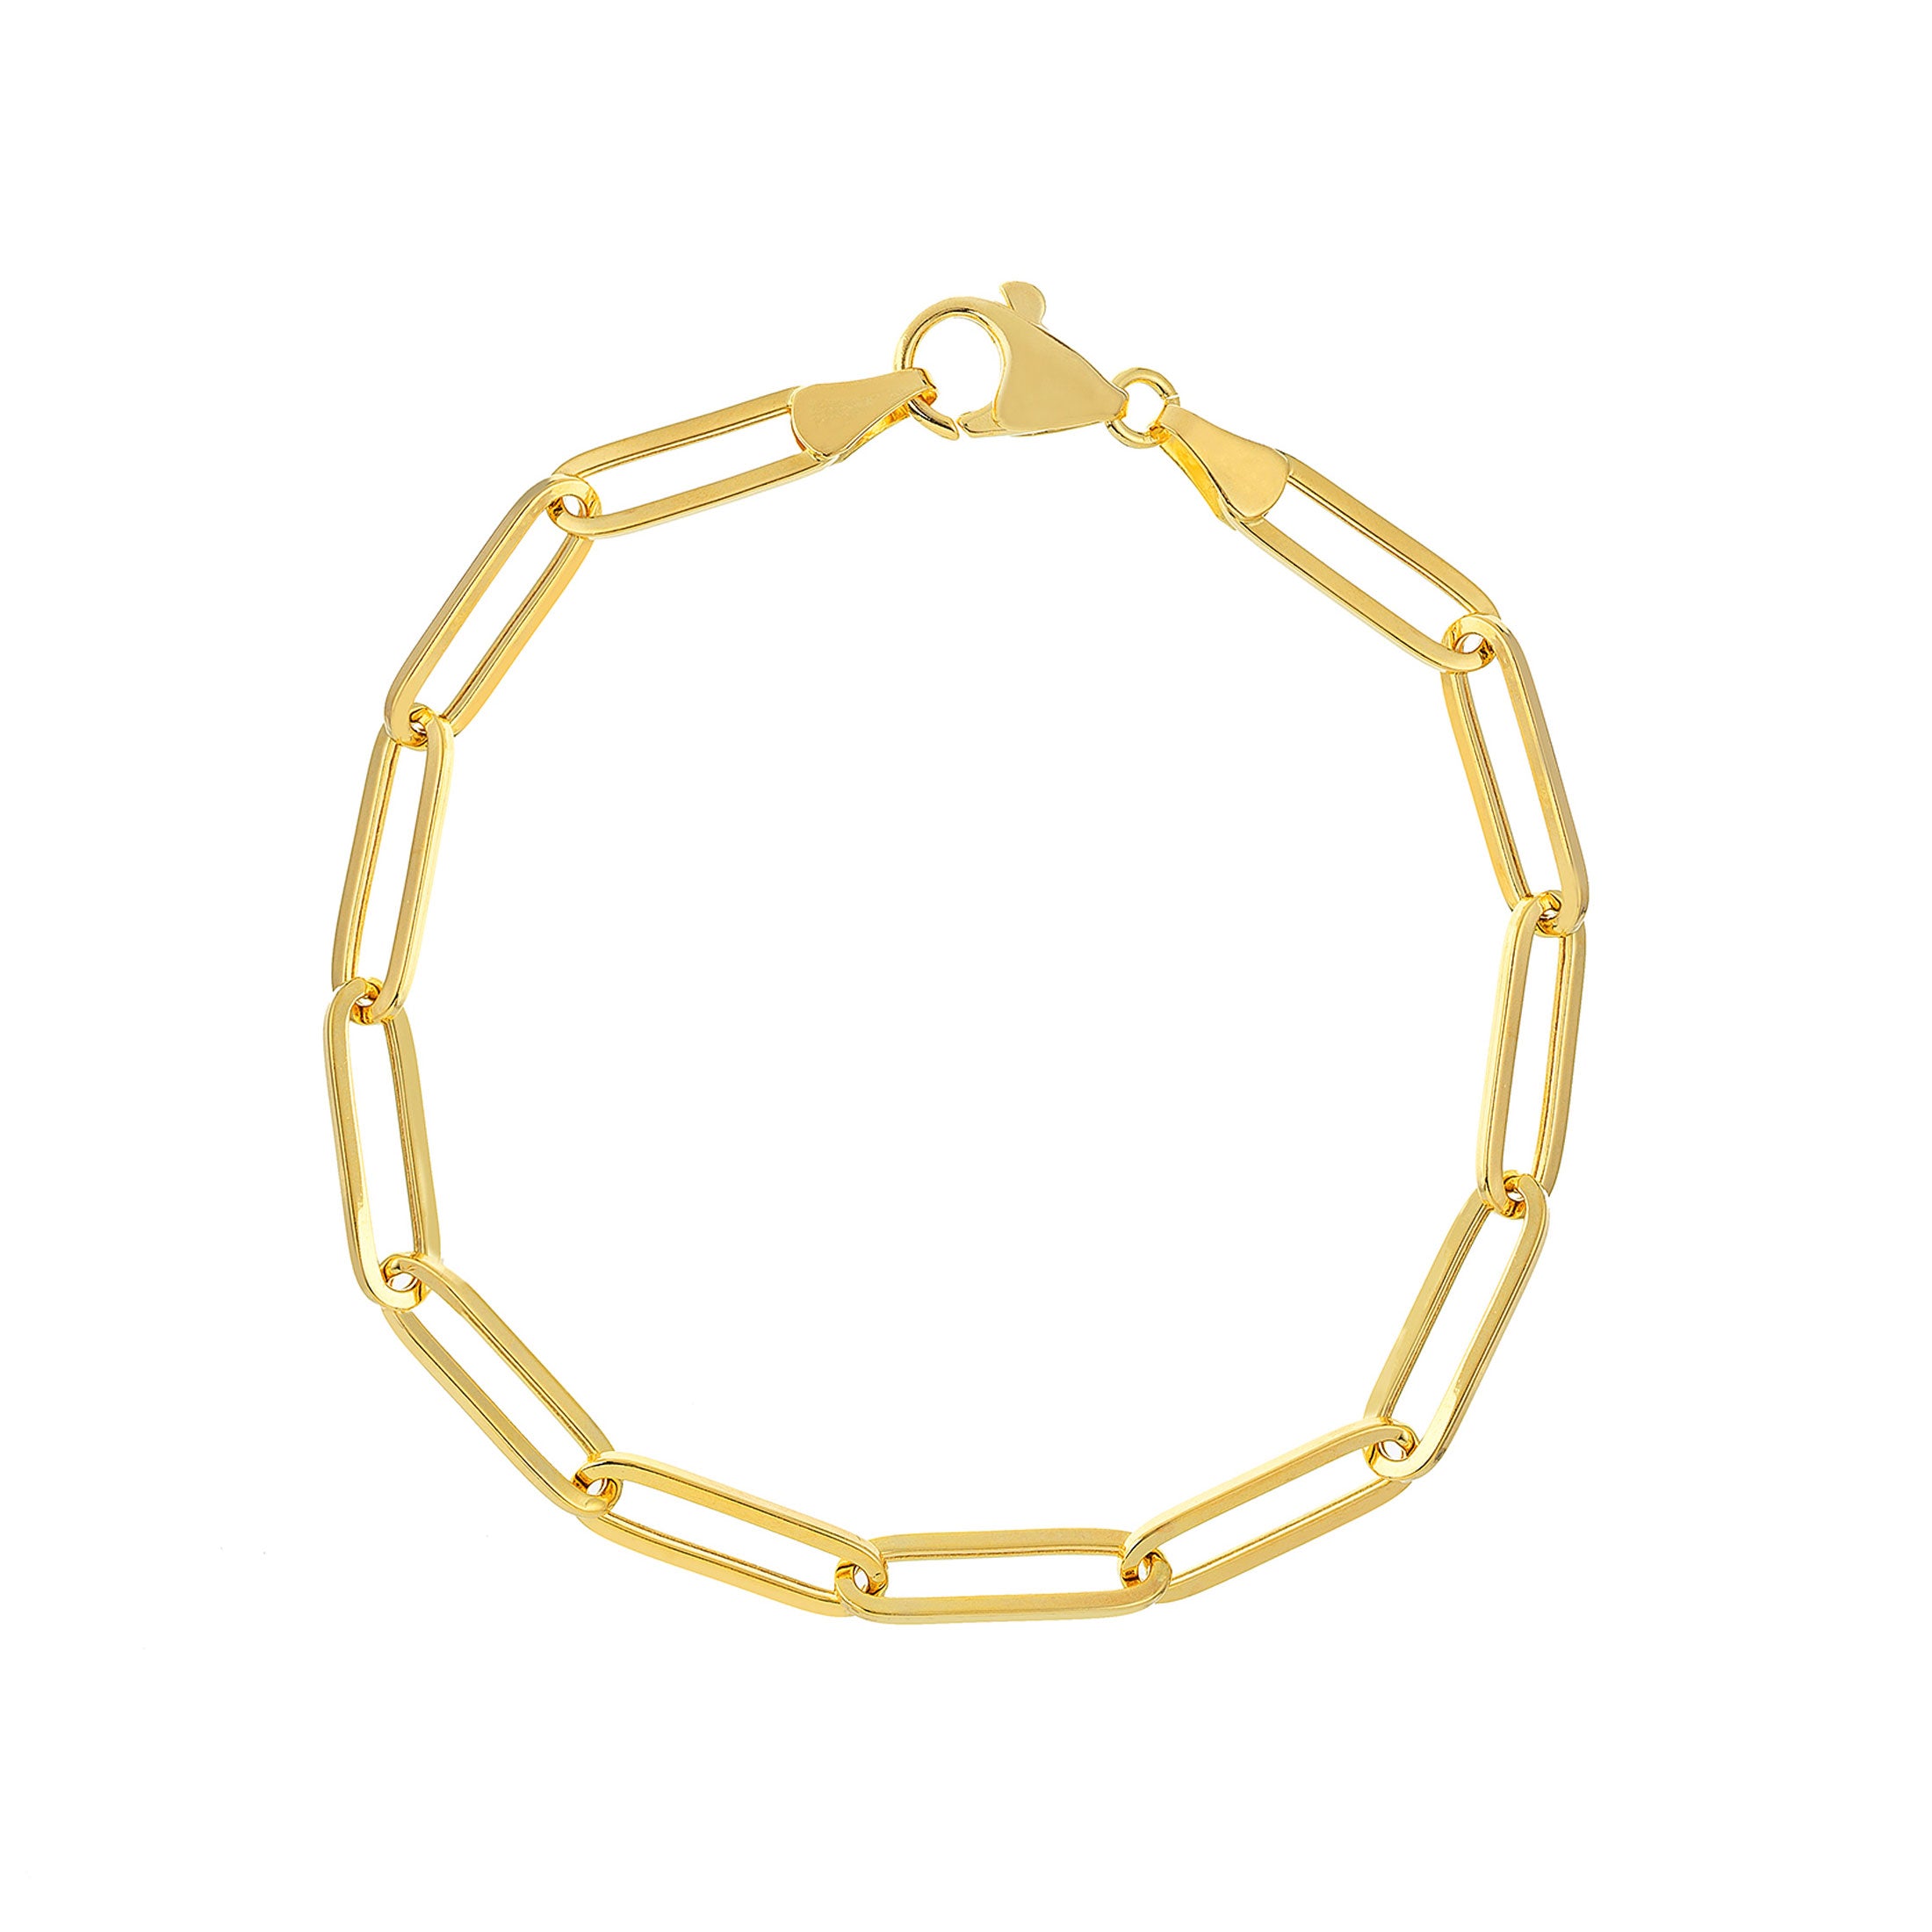 Chain bracelet yellow – Patches Of Upcycling